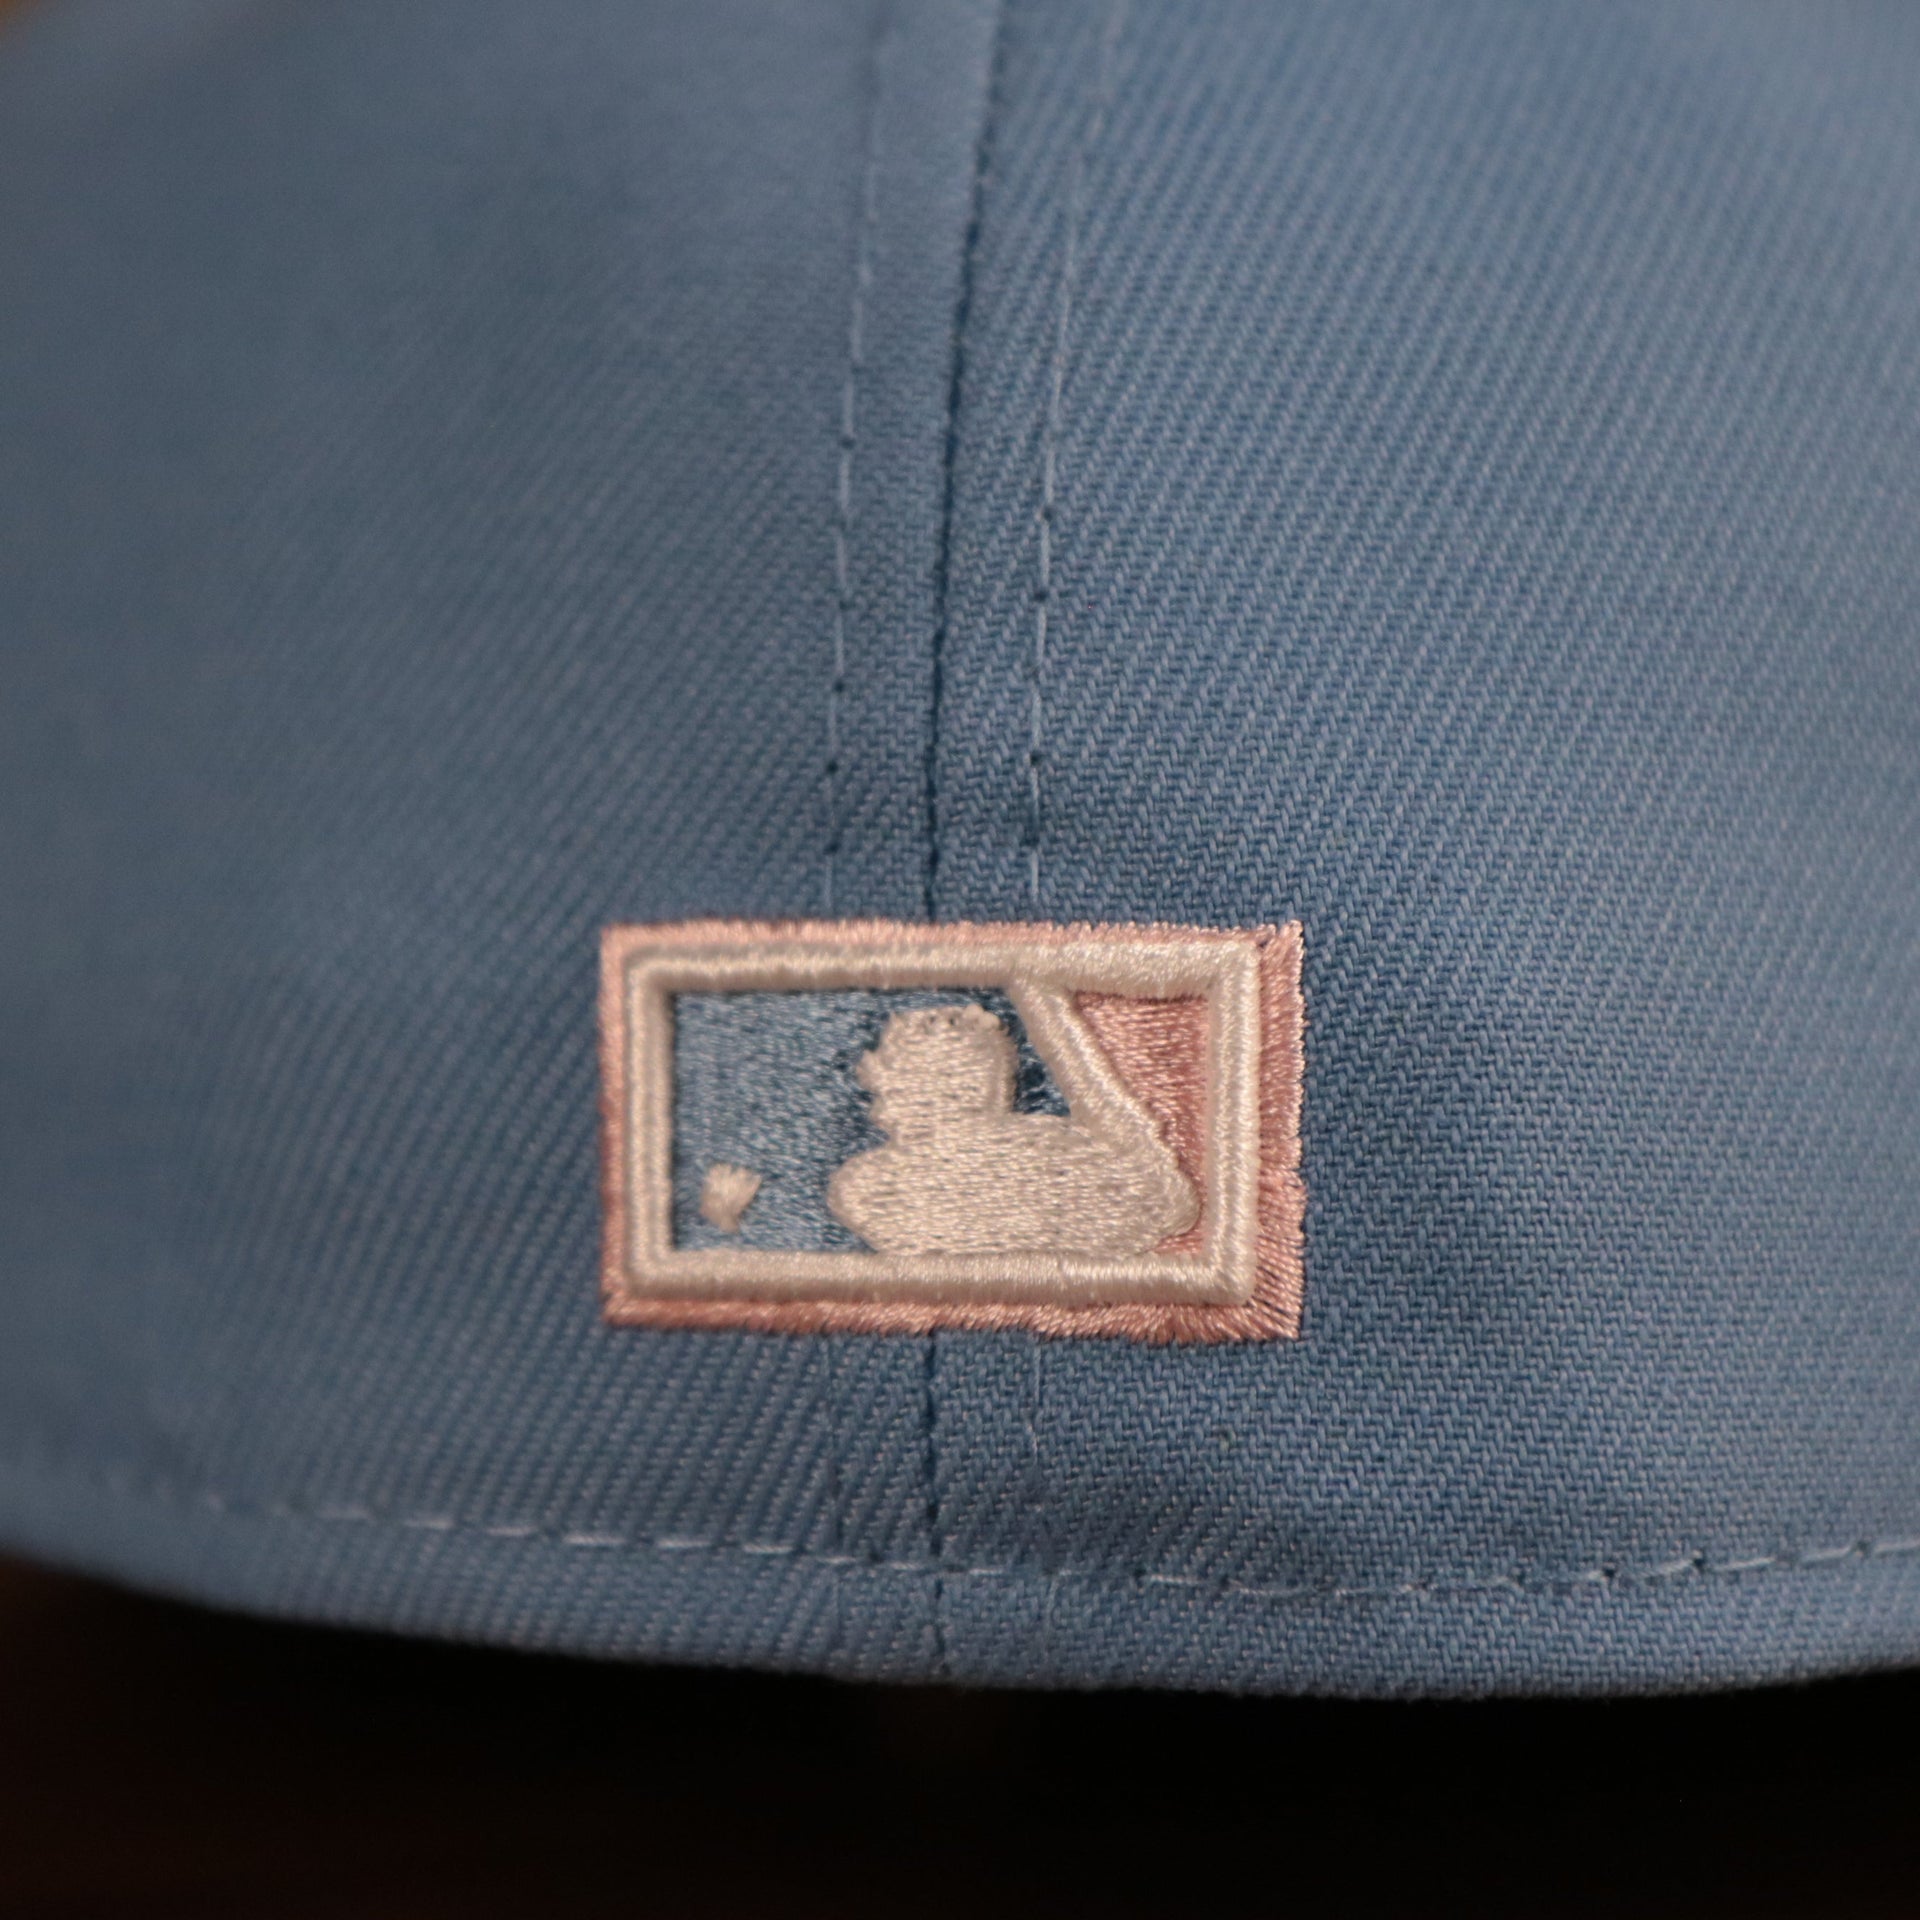 The MLB logo on the back side of the retro Philadelphia Phillies 1996 All Star Game pink underbrim fitted cap.